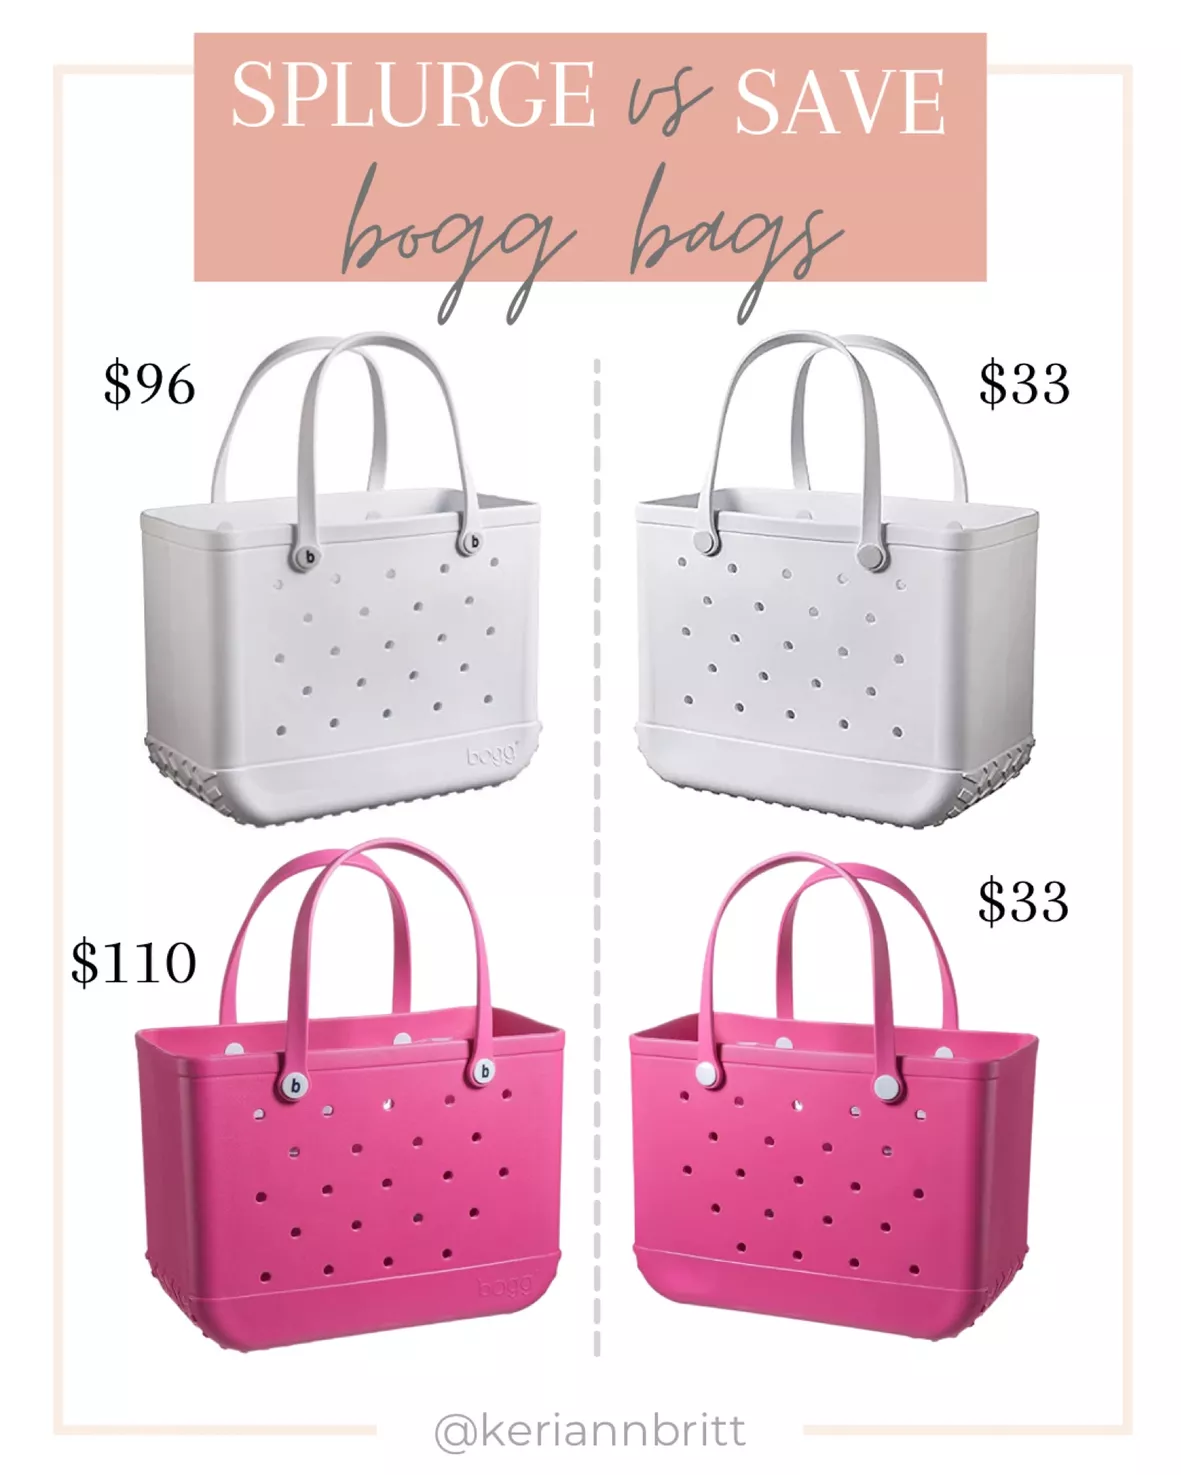 What You Need To Know About Bogg Bags + Dupes — DIY Home Improvements  Carolyn's Blooming Creations